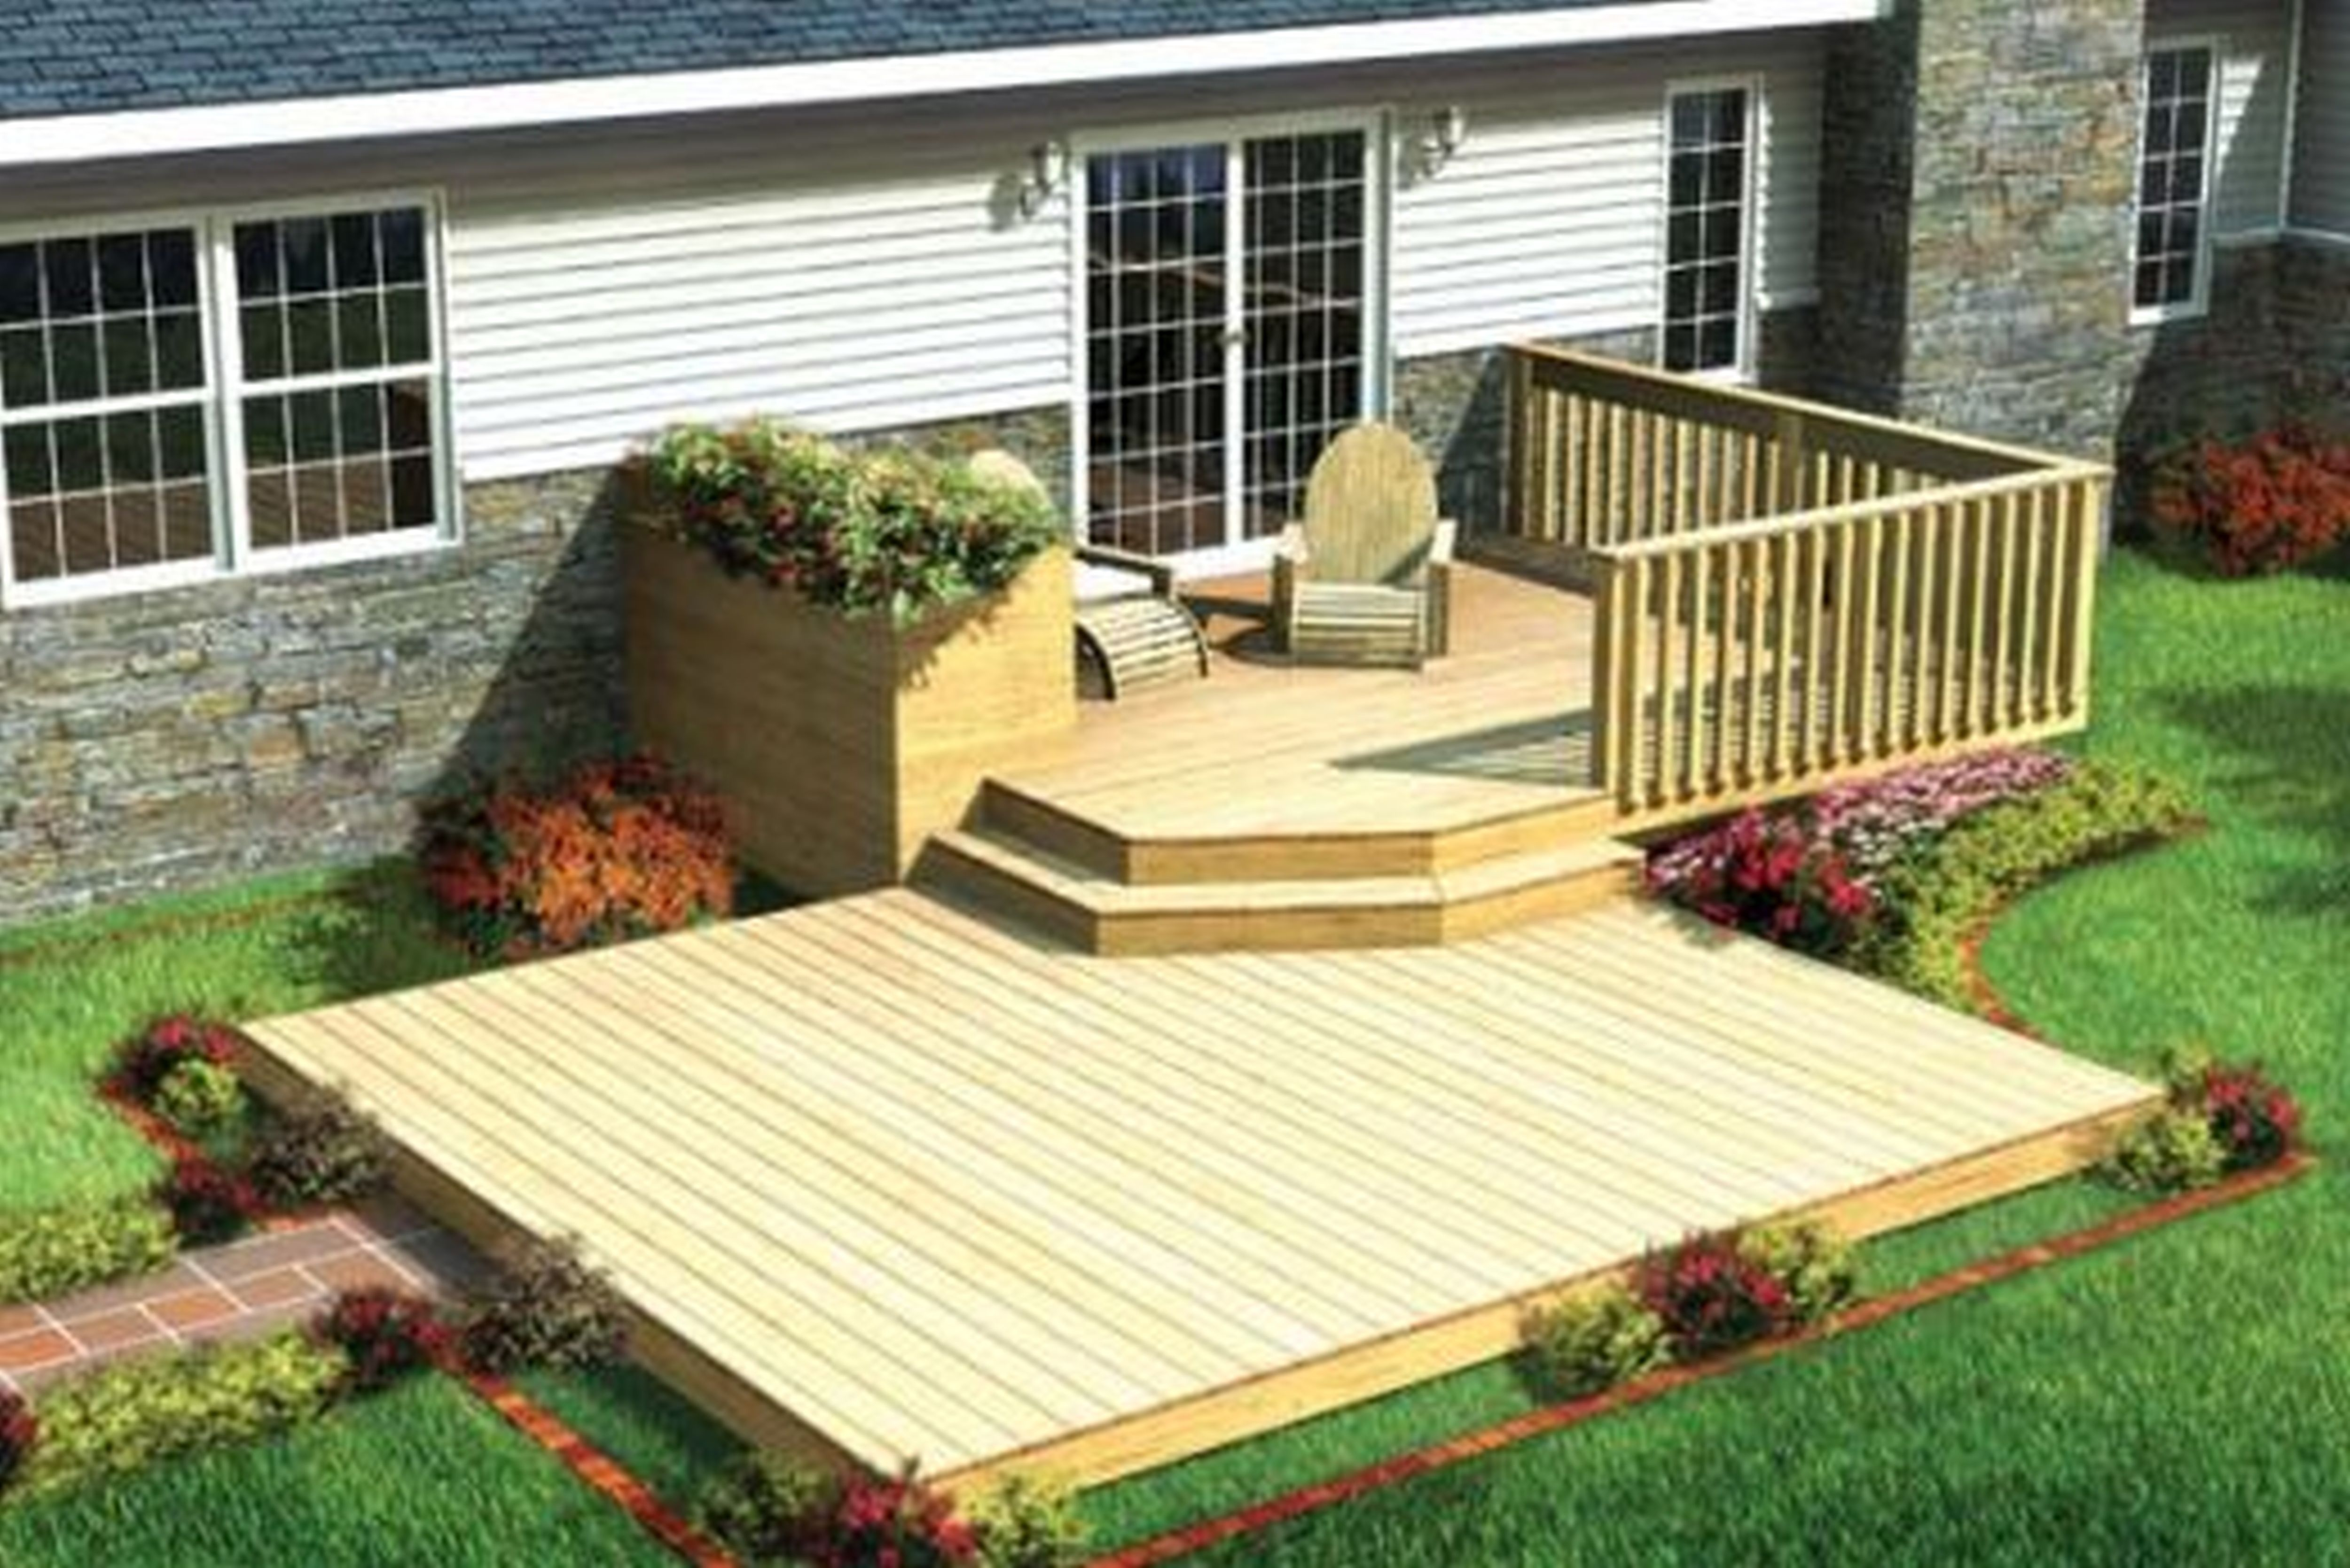 High Quality Outdoor Decks Wood Deck Designs Ideas Simple within dimensions 5000 X 3337